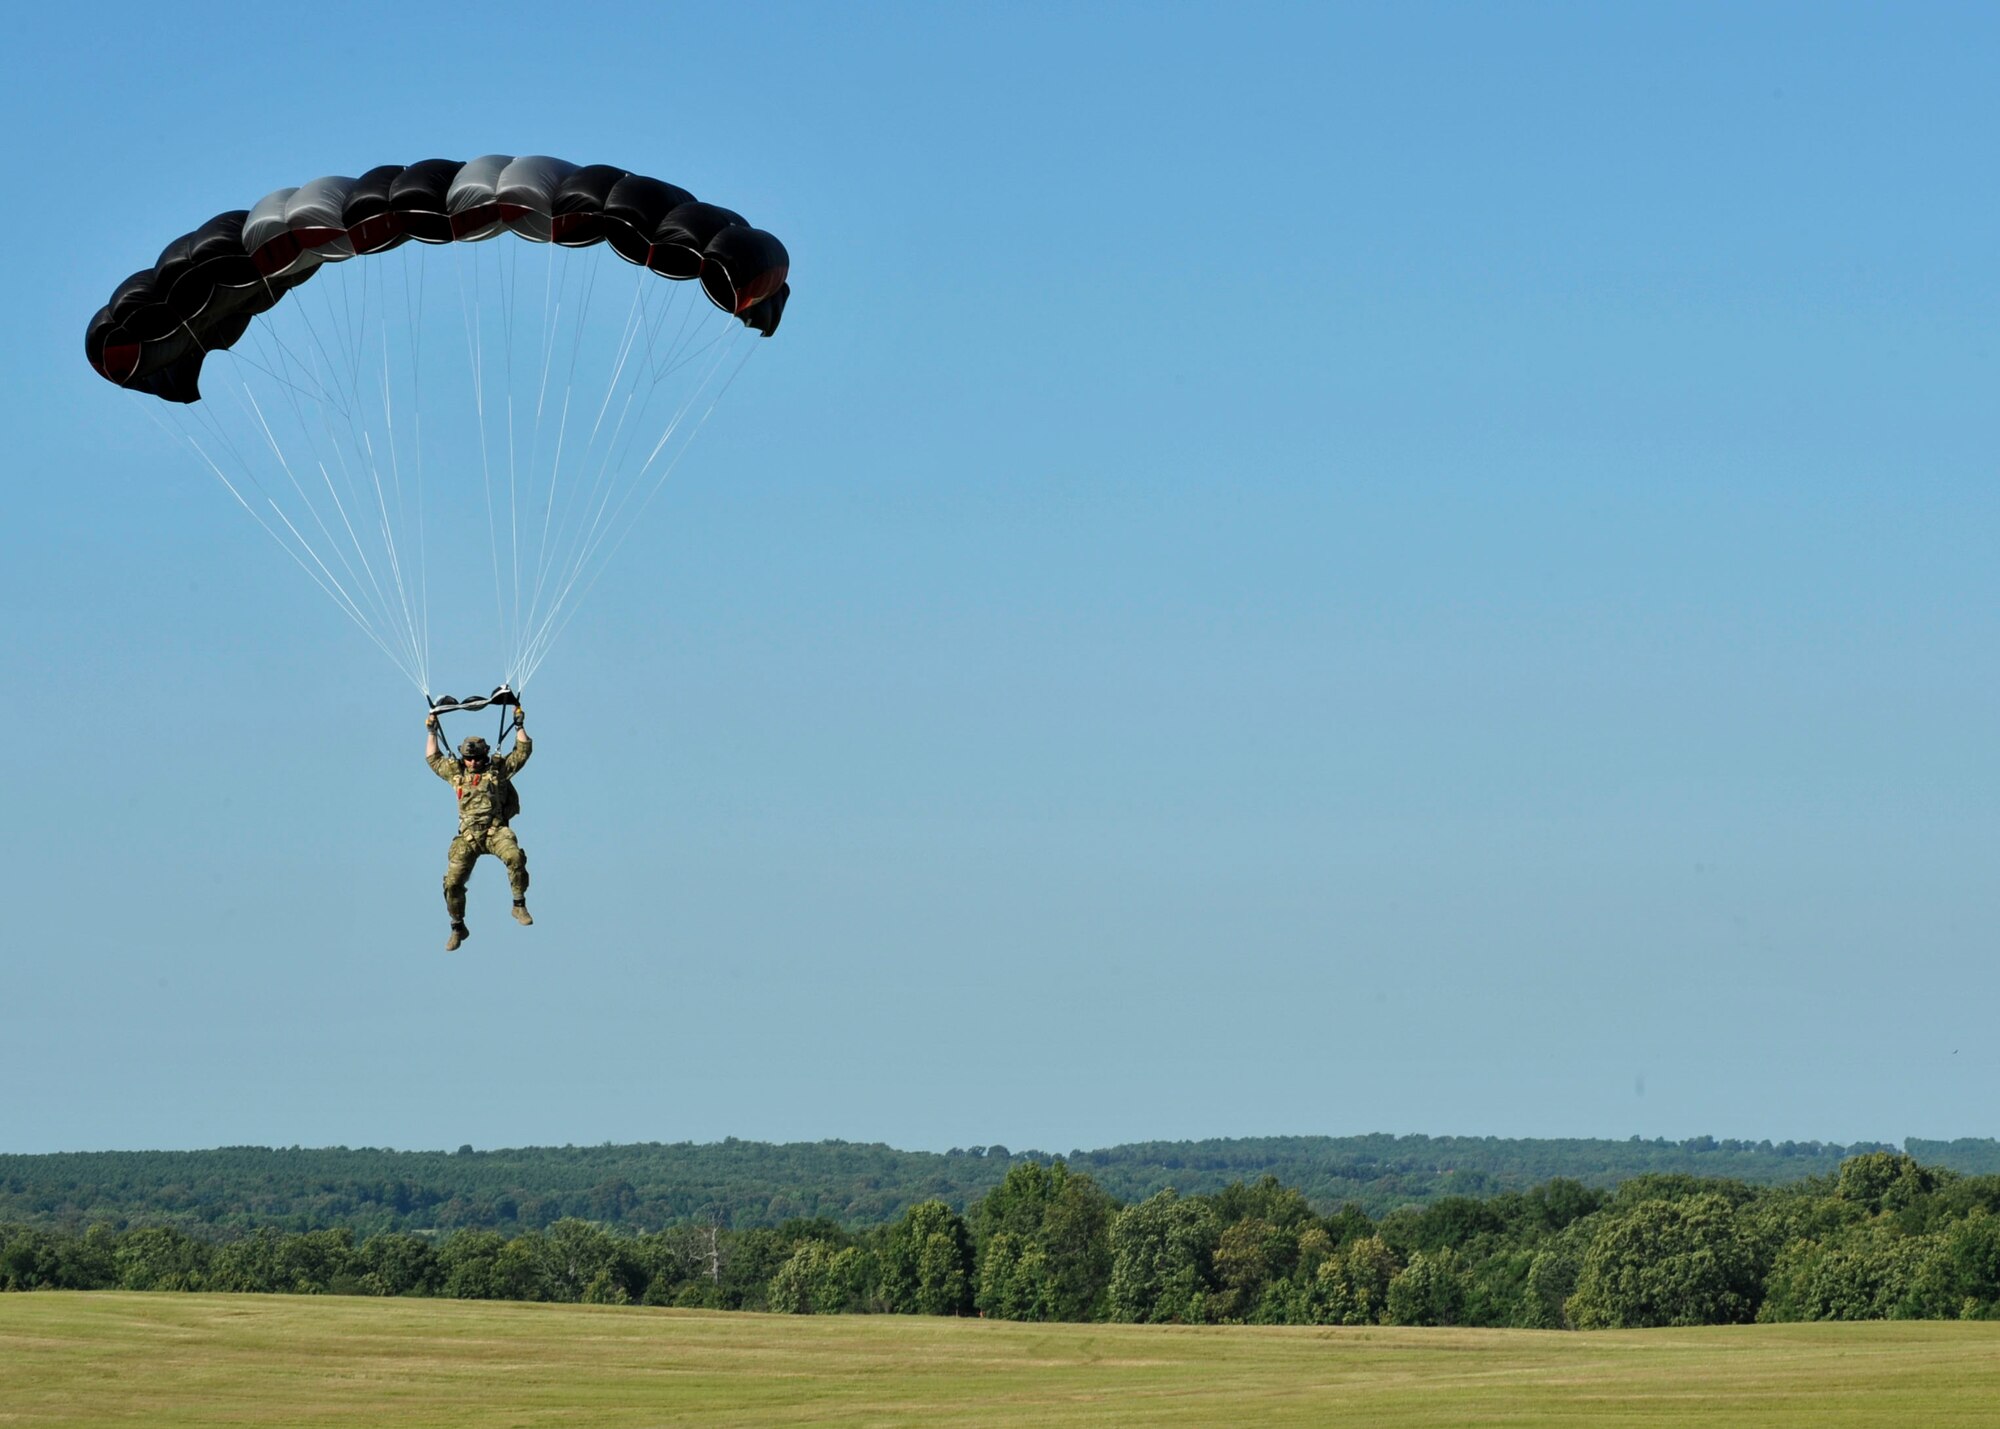 U.S. Air Force Tech. Sgt. Jerrod Mink, 19th Operations Support Squadron survival, evasion, resistance and escape specialist, prepares to land June 29, 2016, at Blackjack Drop Zone in Beebe, Ark. Mink, along with others, performed a high-altitude low-opening military free-fall from approximately 12,500 feet. (U.S. Air Force photo by Senior Airman Stephanie Serrano)